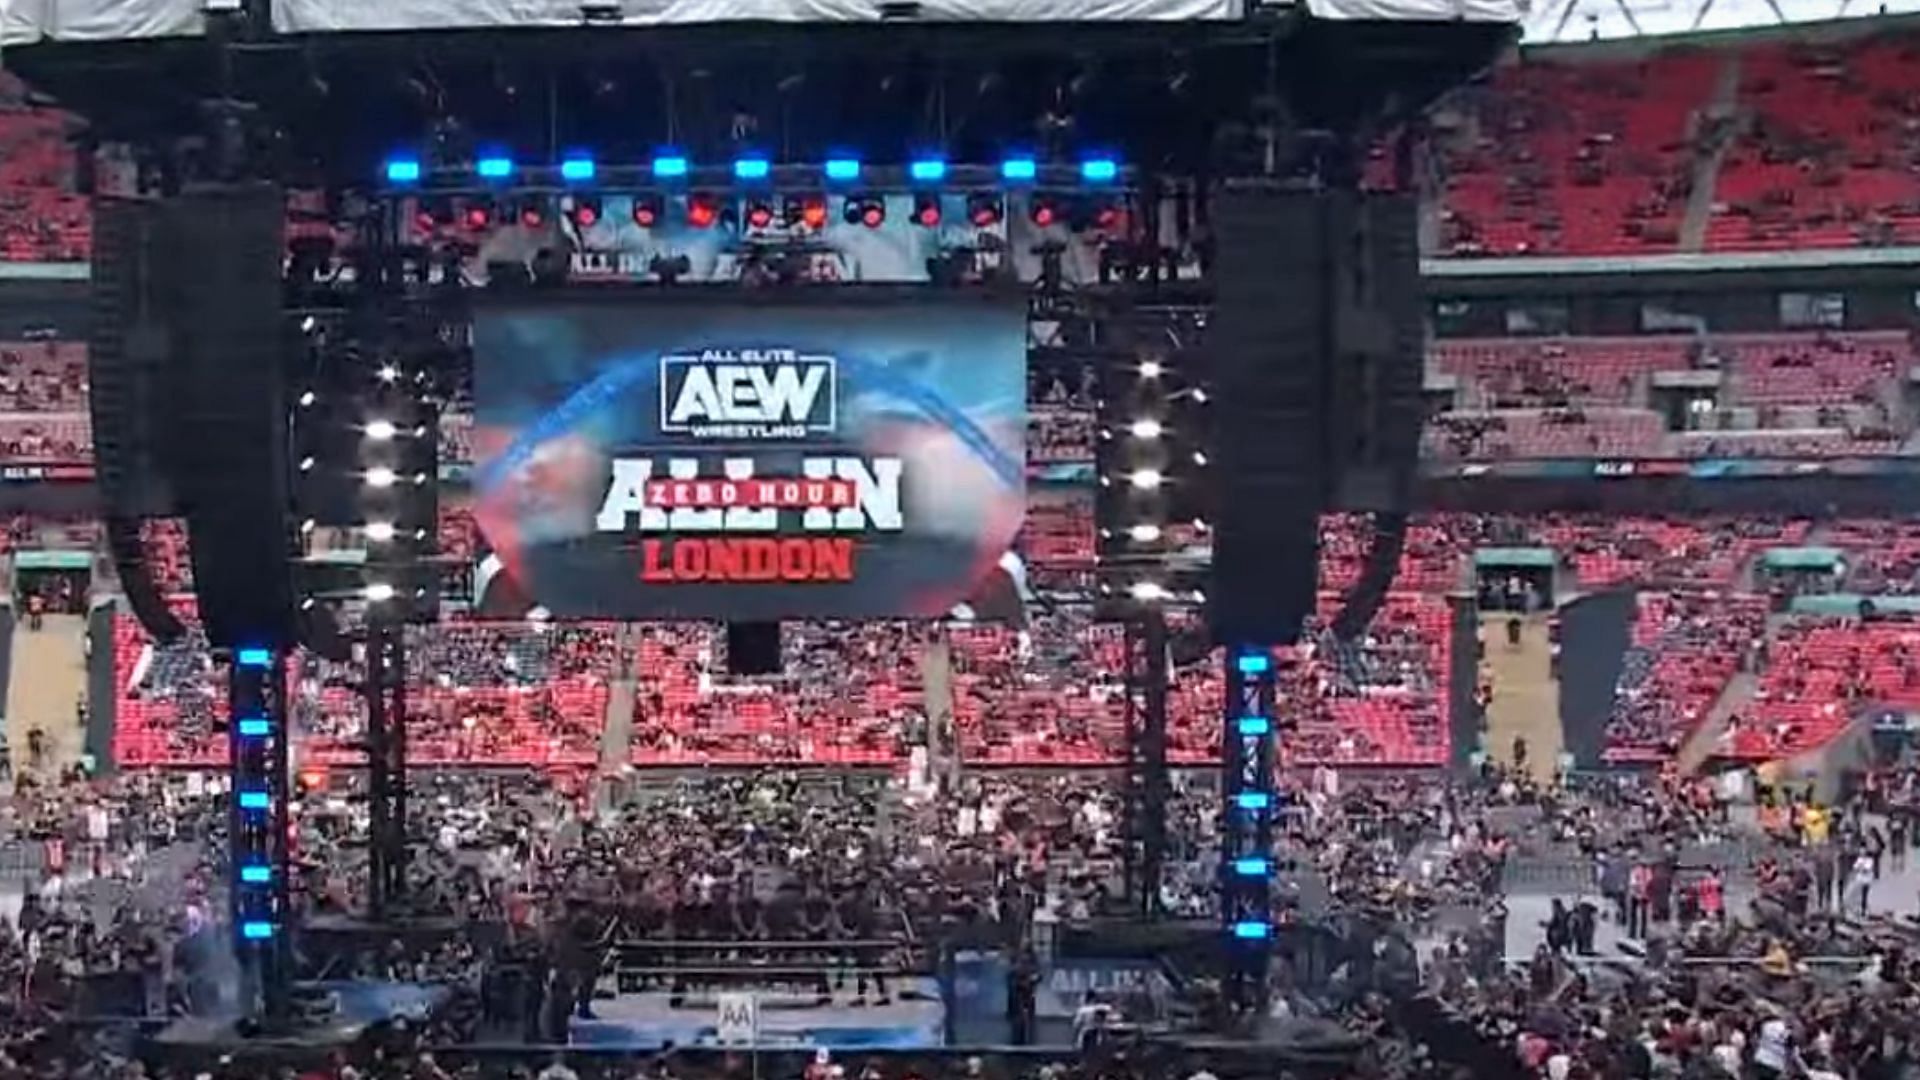 All In 2023 was one of the most successful AEW pay-per-views of all time [Image Credits: AEW